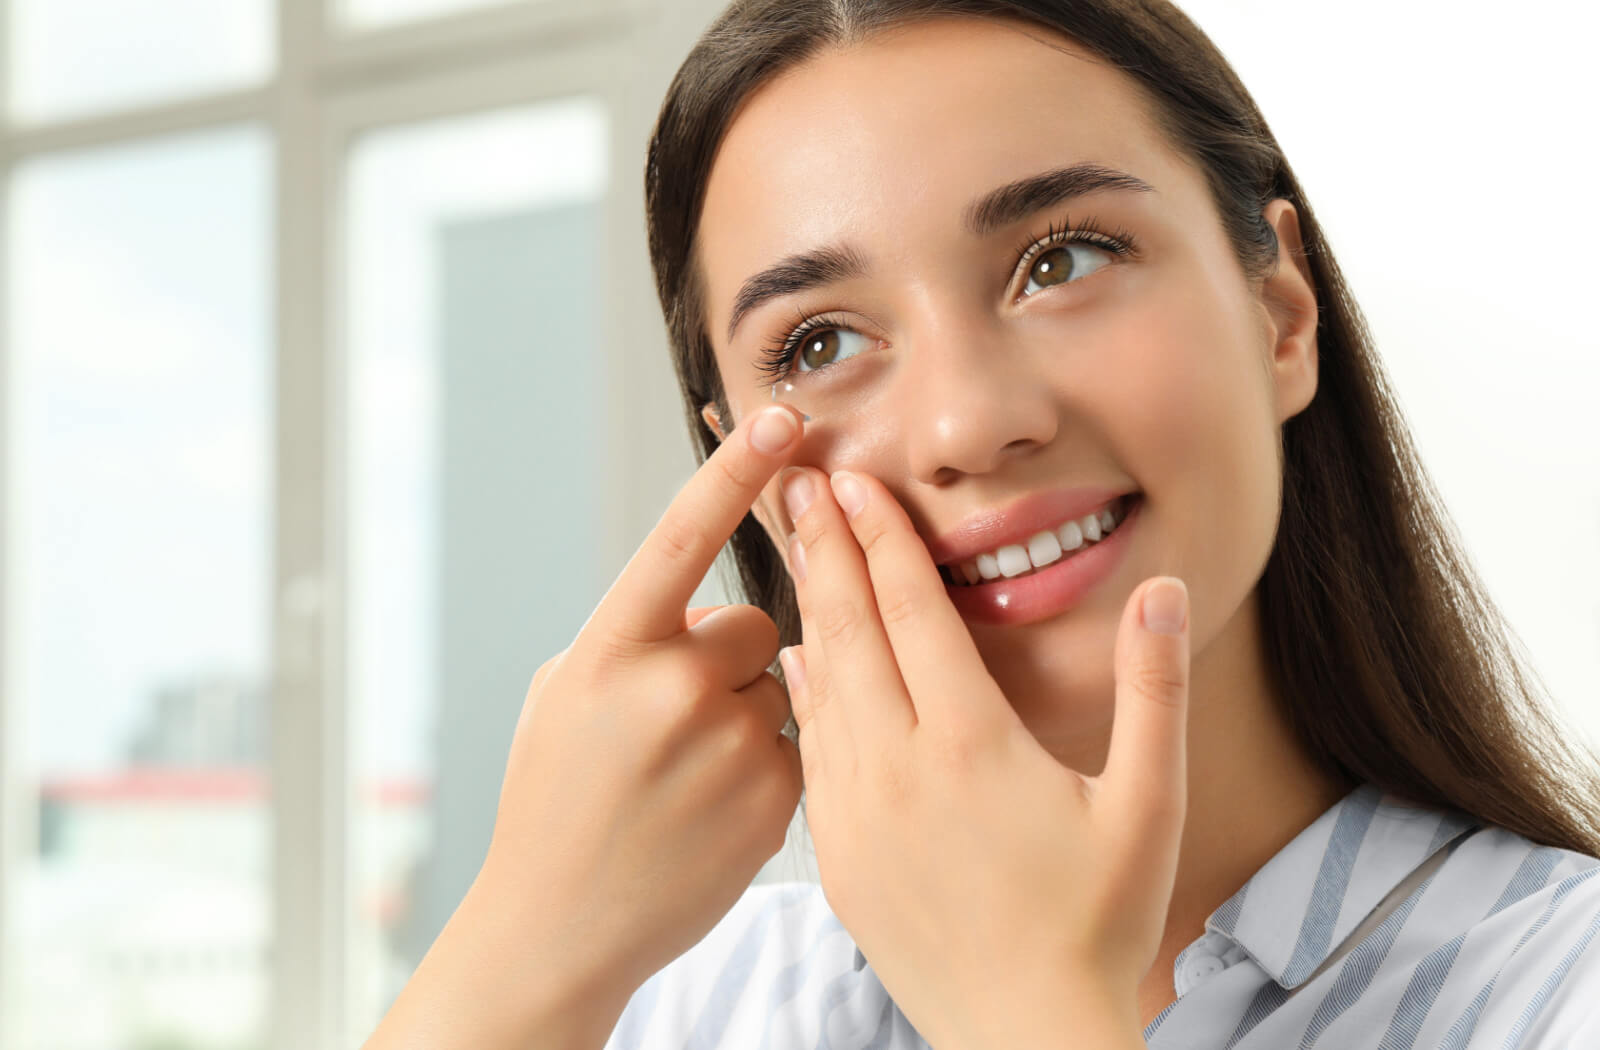 A smiling young woman is inserting a contact lens into her right eye